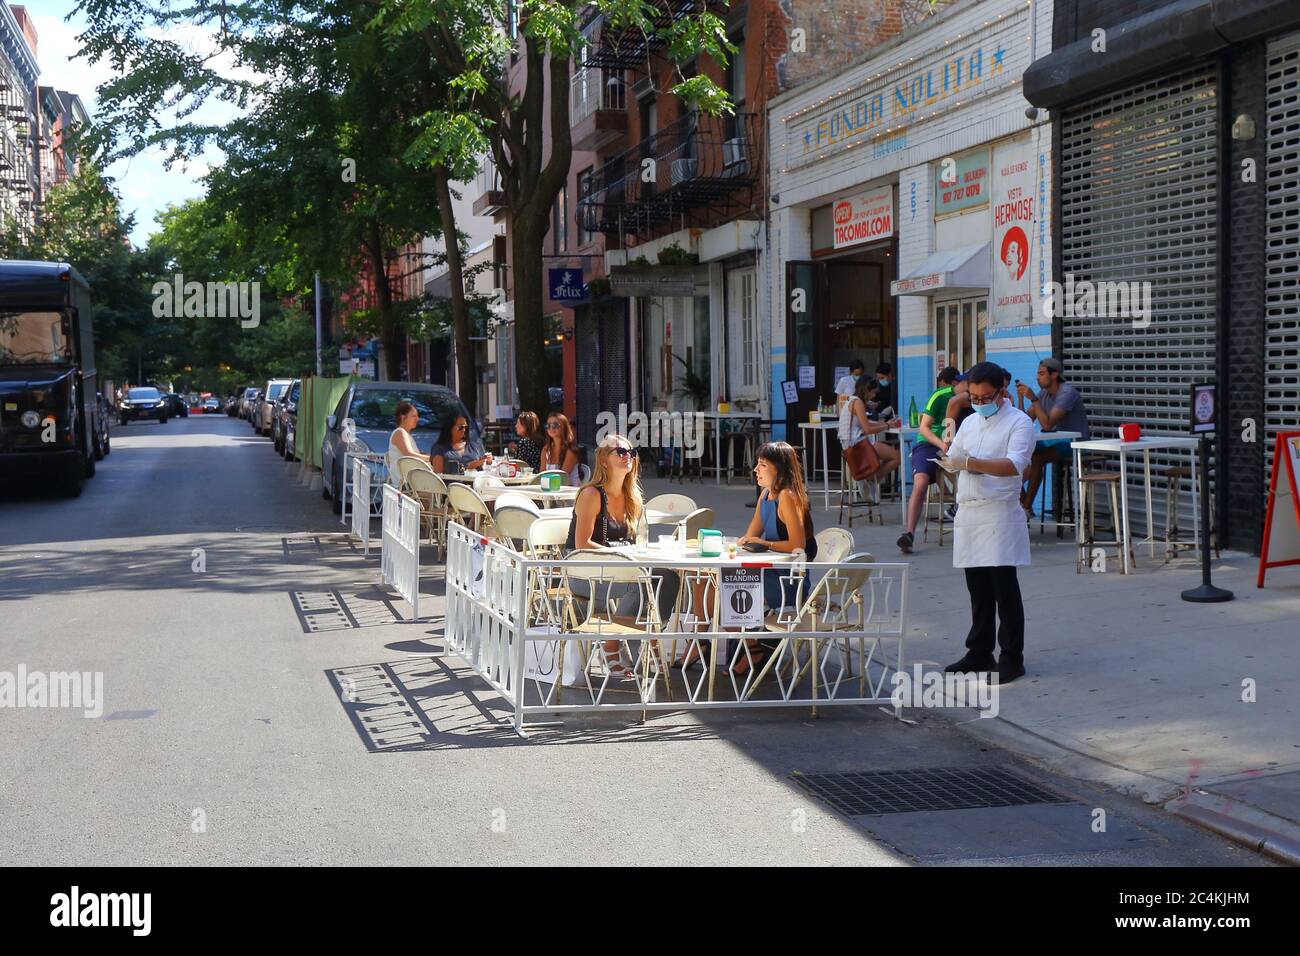 New York, NY. June 26, 2020. Socially distanced outdoor dining outside Tacombi in NoLiTa under Phase 2 reopening of New York City. Some restaurants and bars have expanded capacity by converting parking lanes into parklets, sidewalk extensions onto the roadway for dining and leisure, and not for car storage. Stock Photo